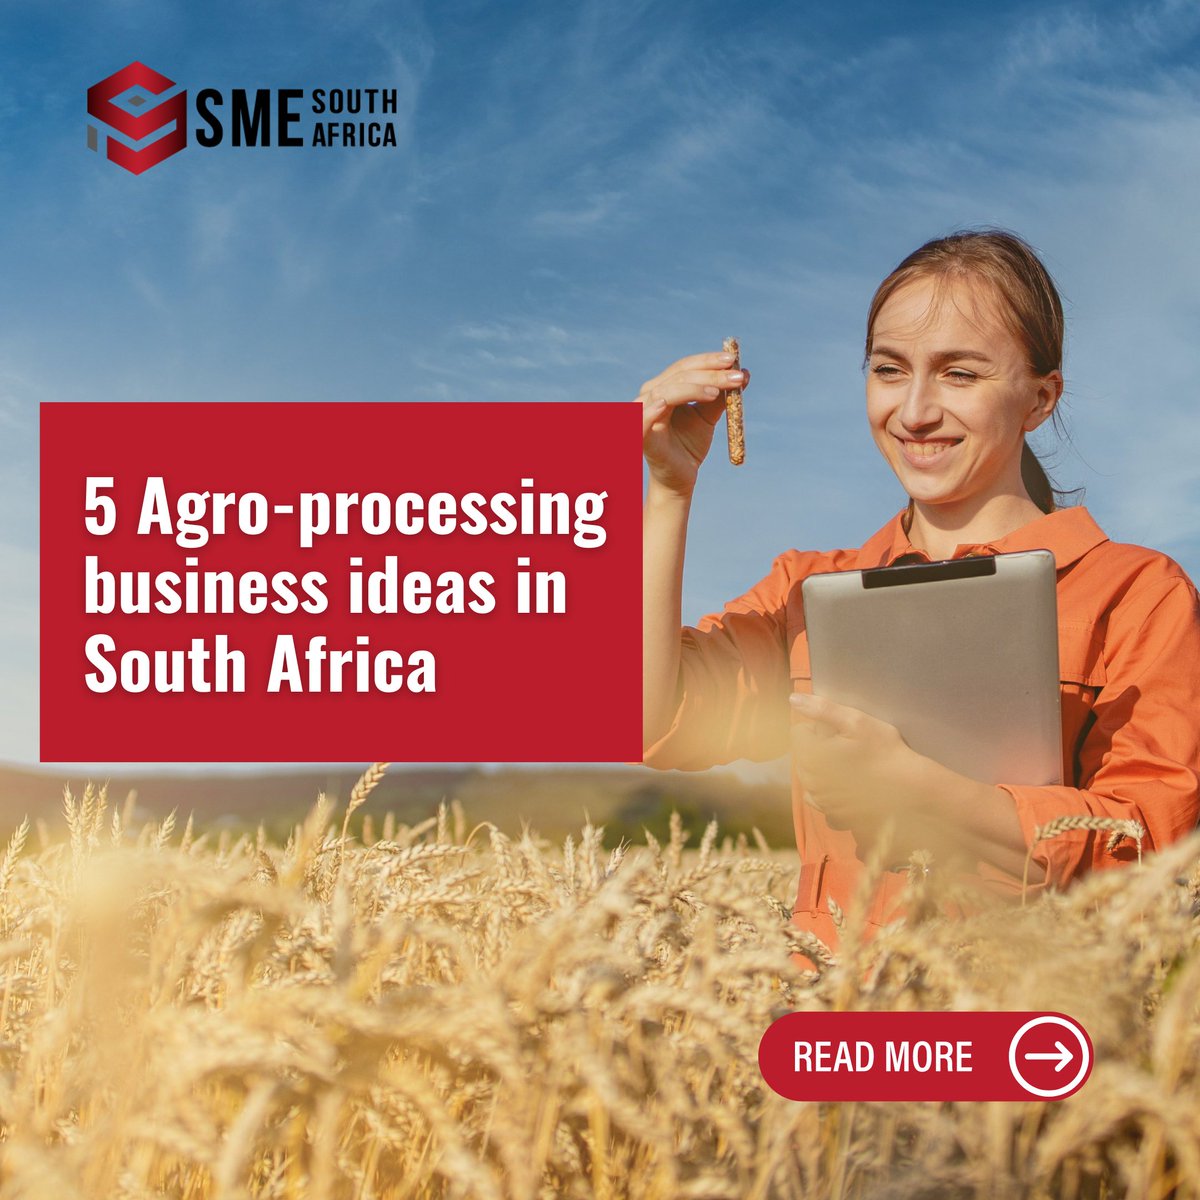 🌾 Want to earn more from your farm? Or start a new business? Read our article for simple agro-processing ideas!

Read the article now.
Link: smesouthafrica.co.za/5-agro-process…

#Farming #BusinessIdeas  #SMESouthAfrica